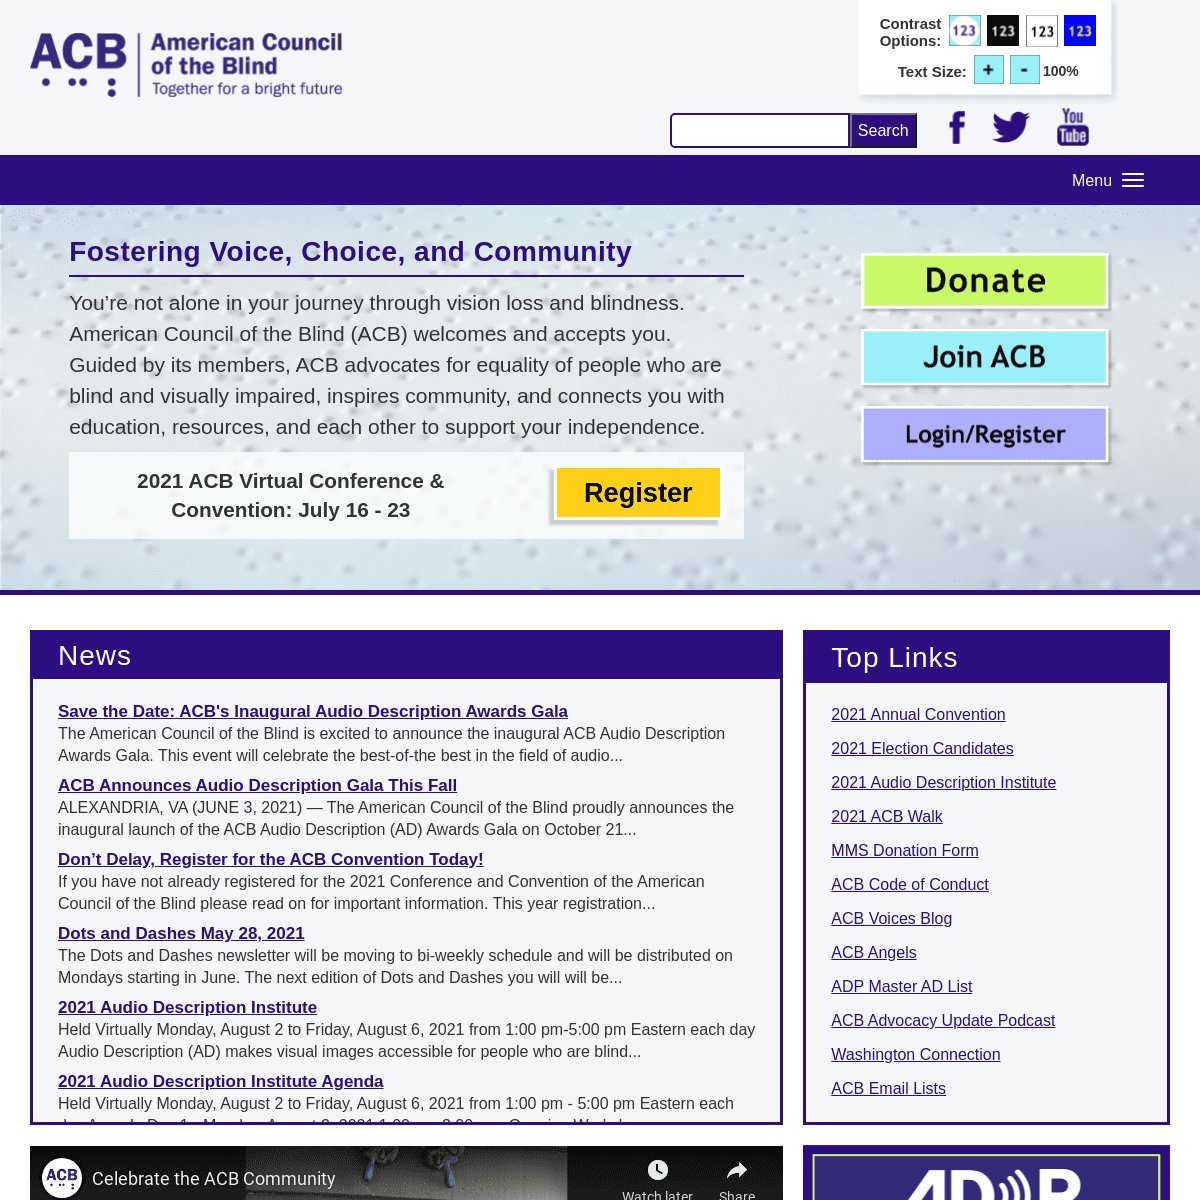 A complete backup of https://acb.org